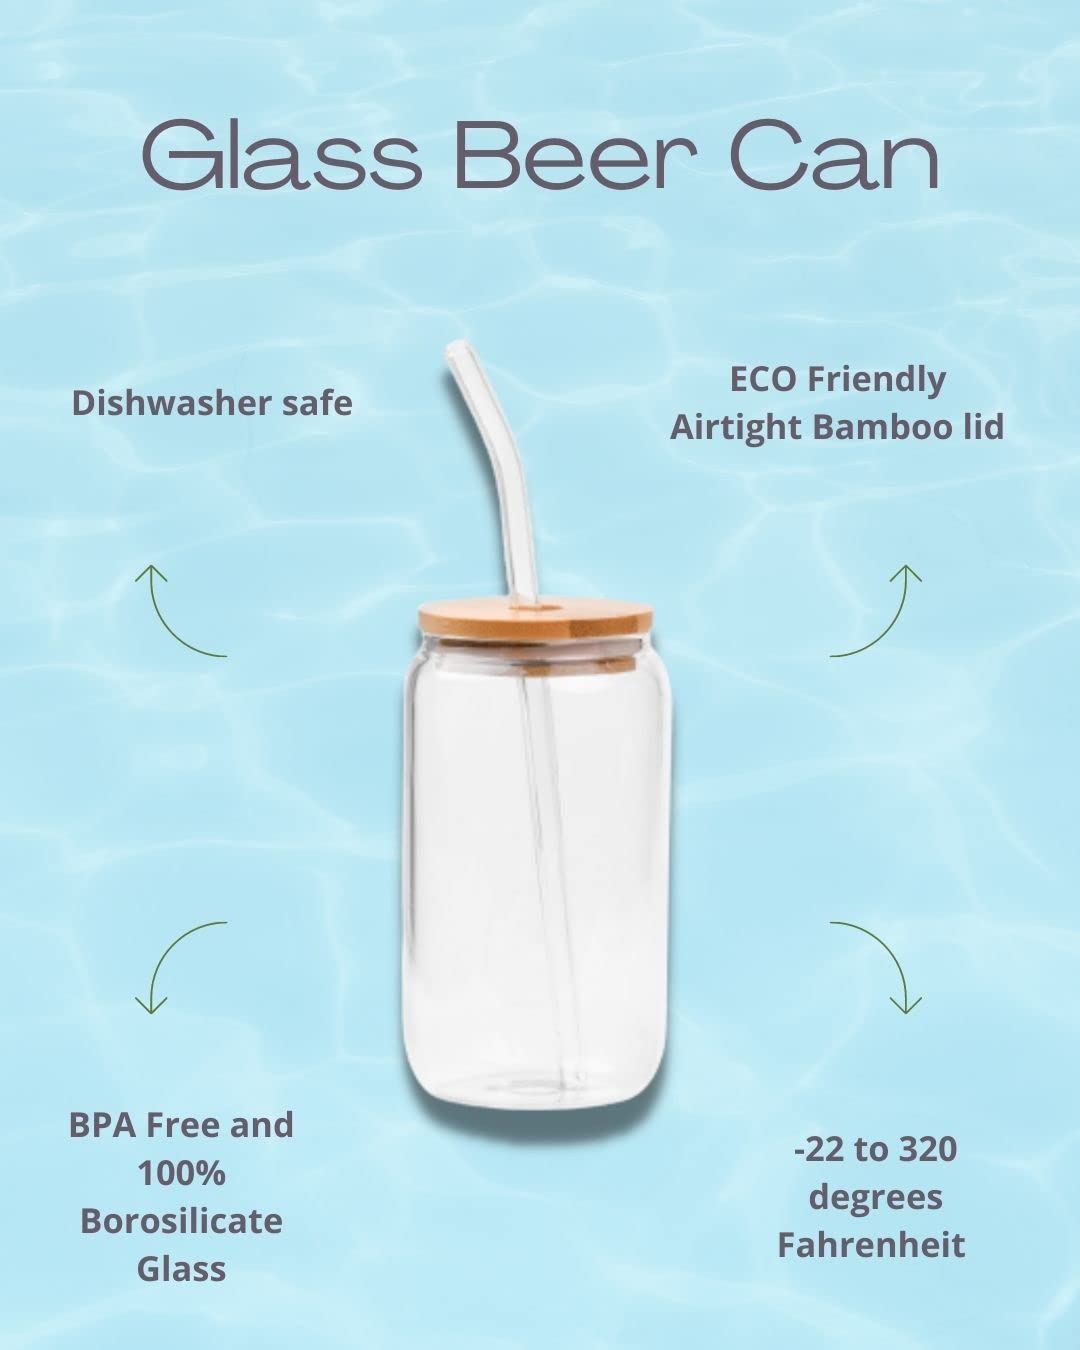 4 Pack Crystal Clear Beer Glass Can with Bamboo Lids Glass Straw and Brush Cleaner- Reusable Eco Friendly Heat and Cold Resistant Glass, Cocktail, Tumbler, Beer Glass